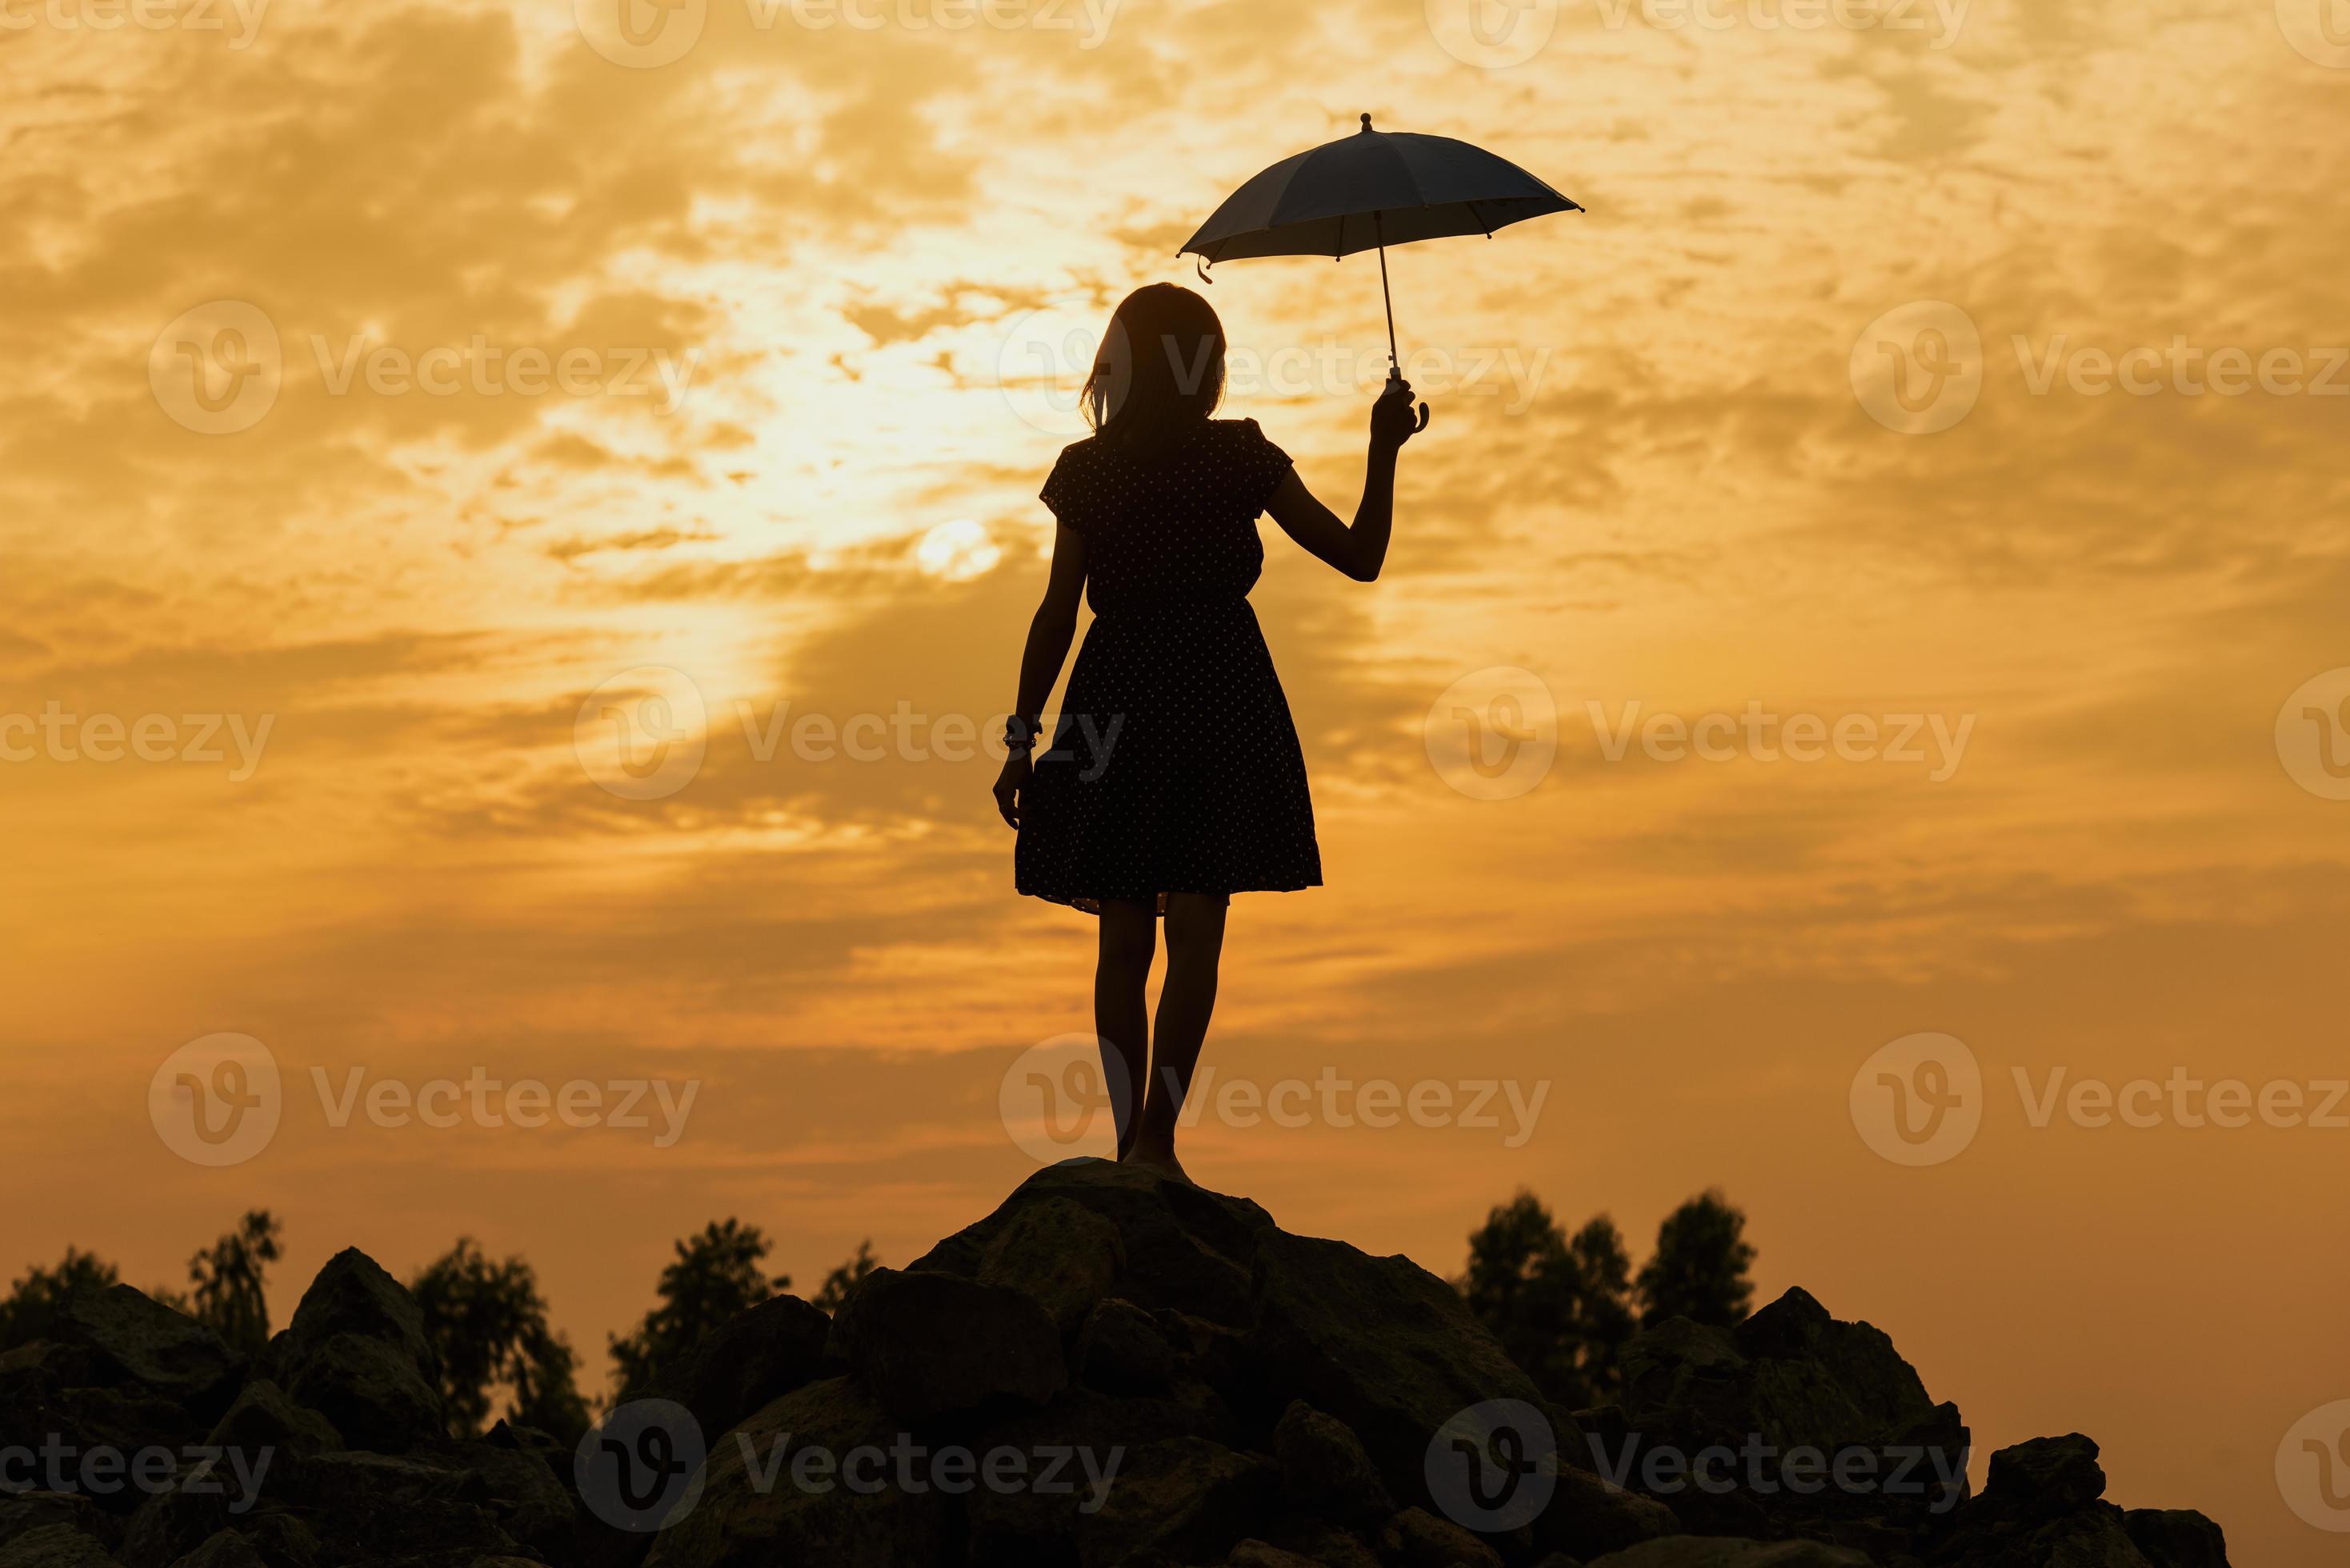 Profile of a Sad Young Woman Silhouette in Swimsuit Stock Image